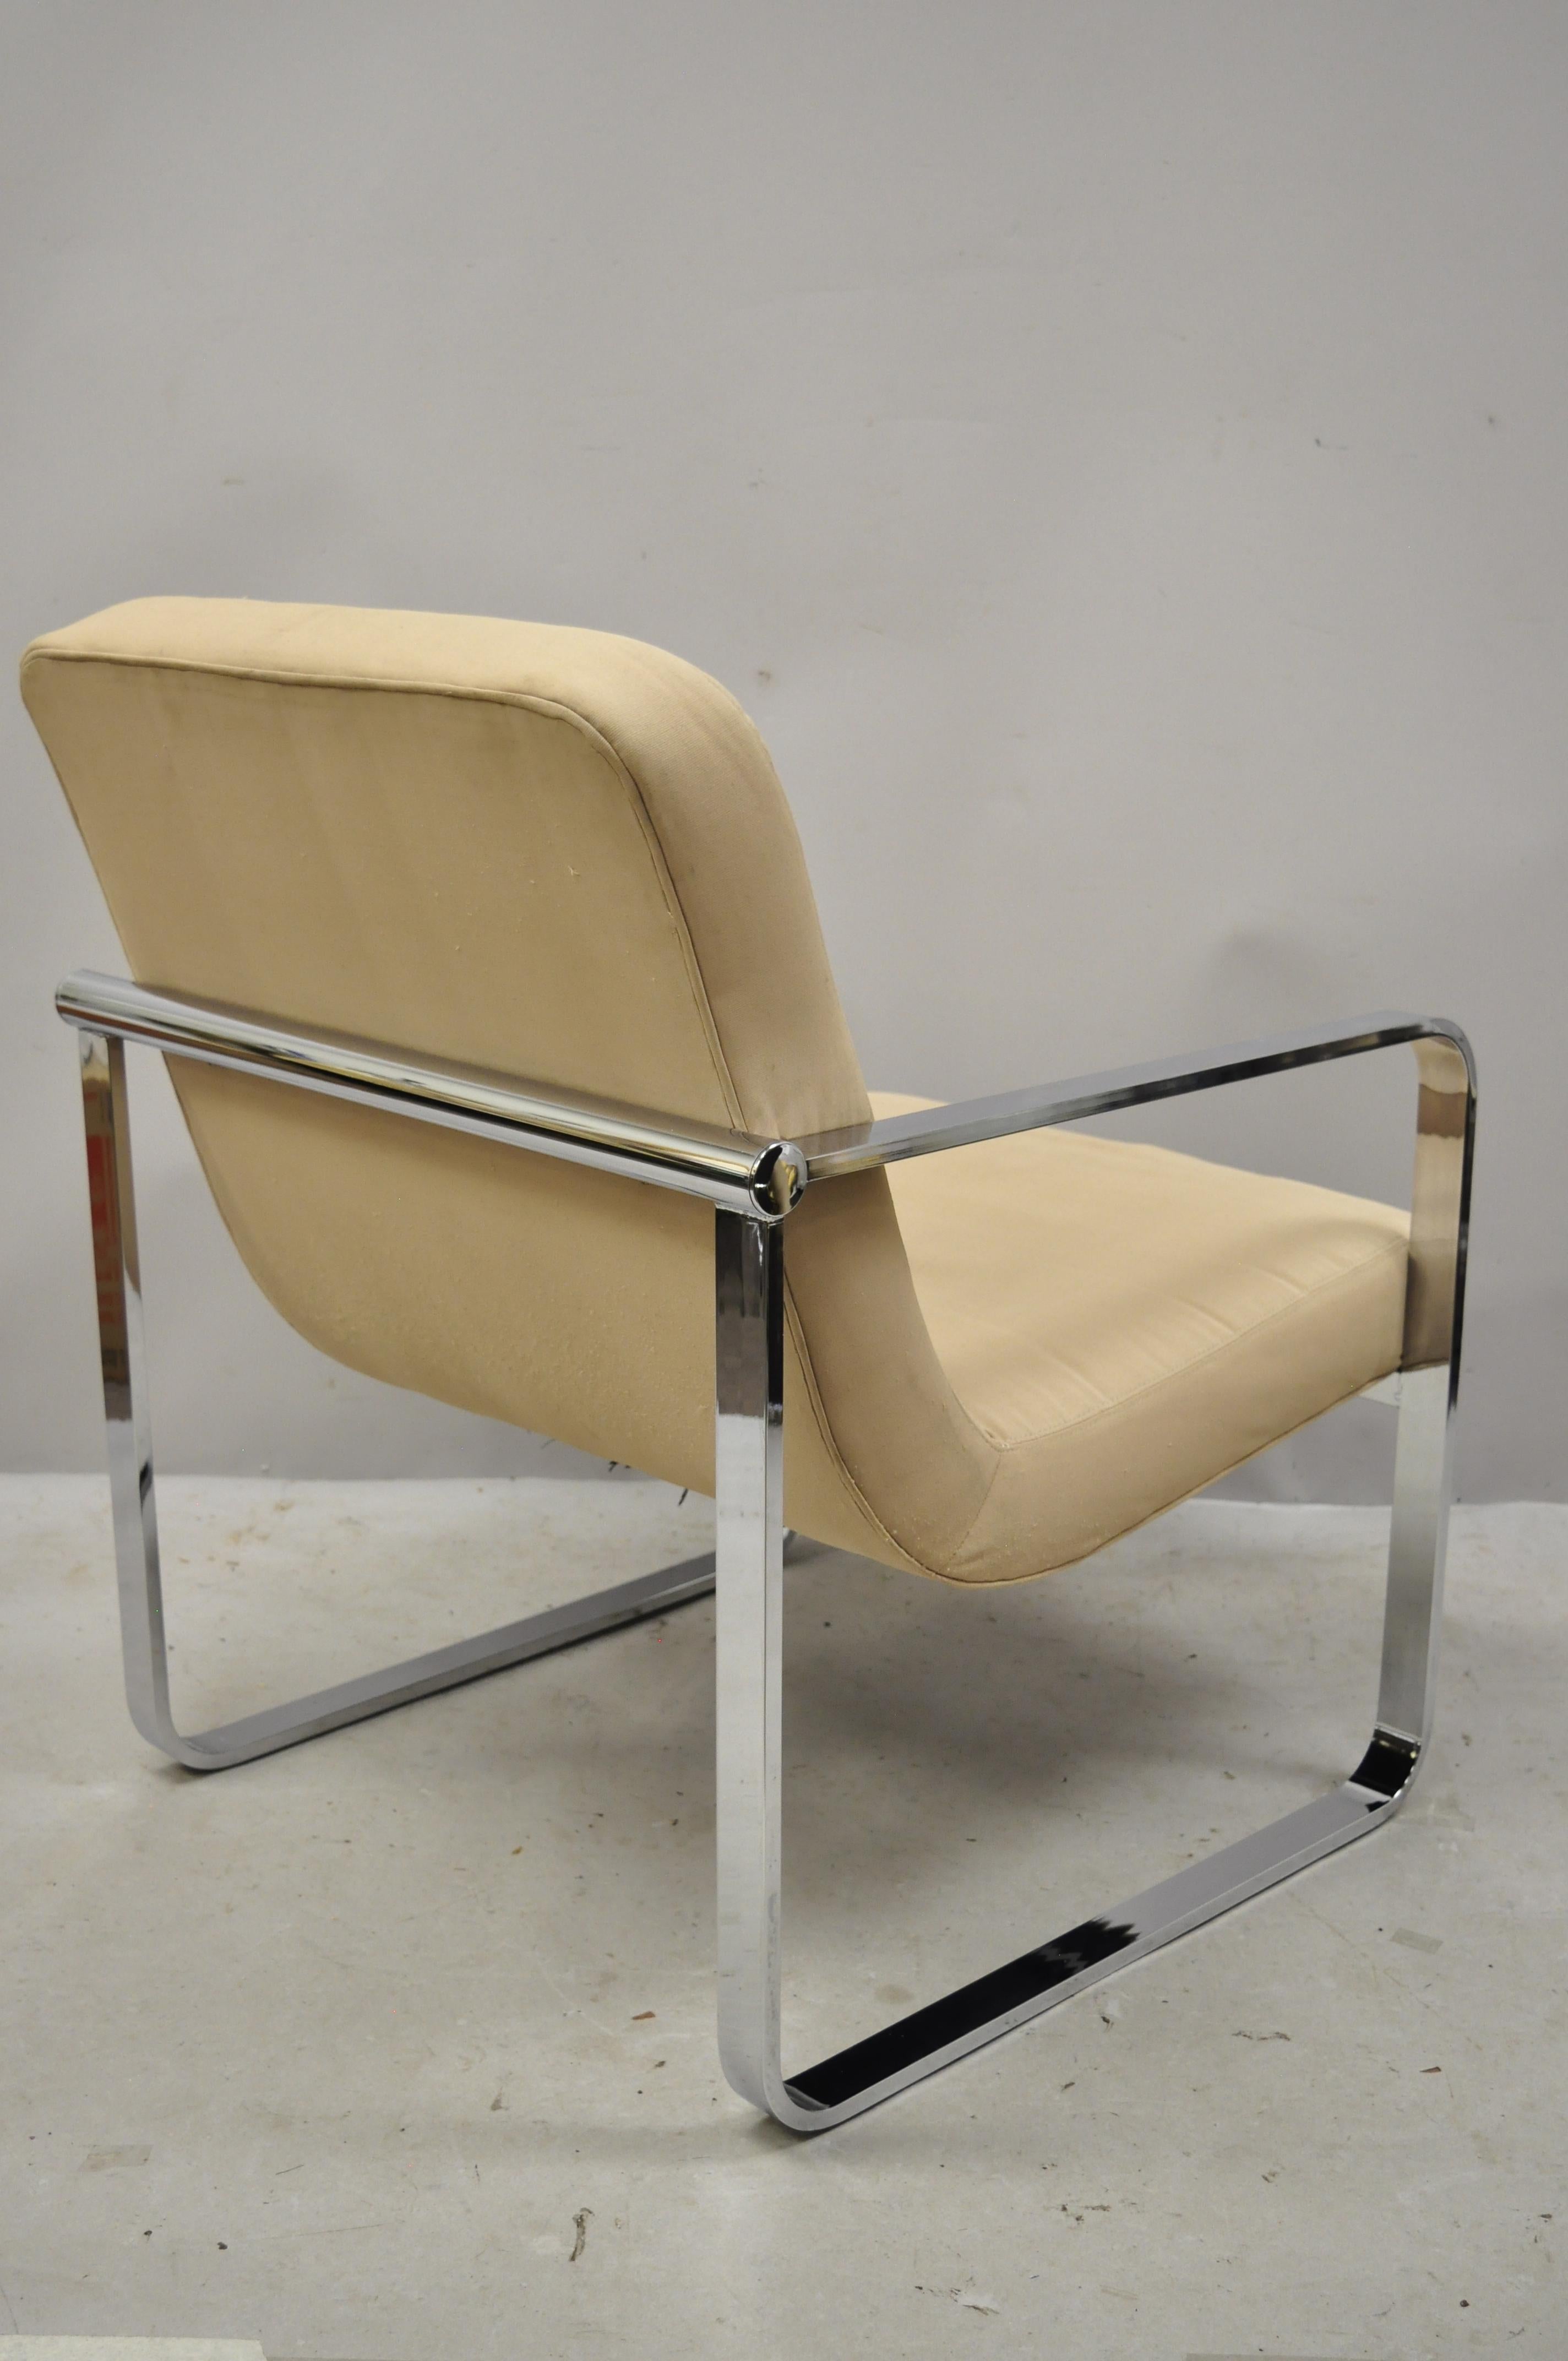 Mid-Century Modern chrome flat bar Art Deco lounge chair. Item features a polished chrome frame, very nice vintage item, clean modernist lines, circa mid-20th century. Measurements: 32